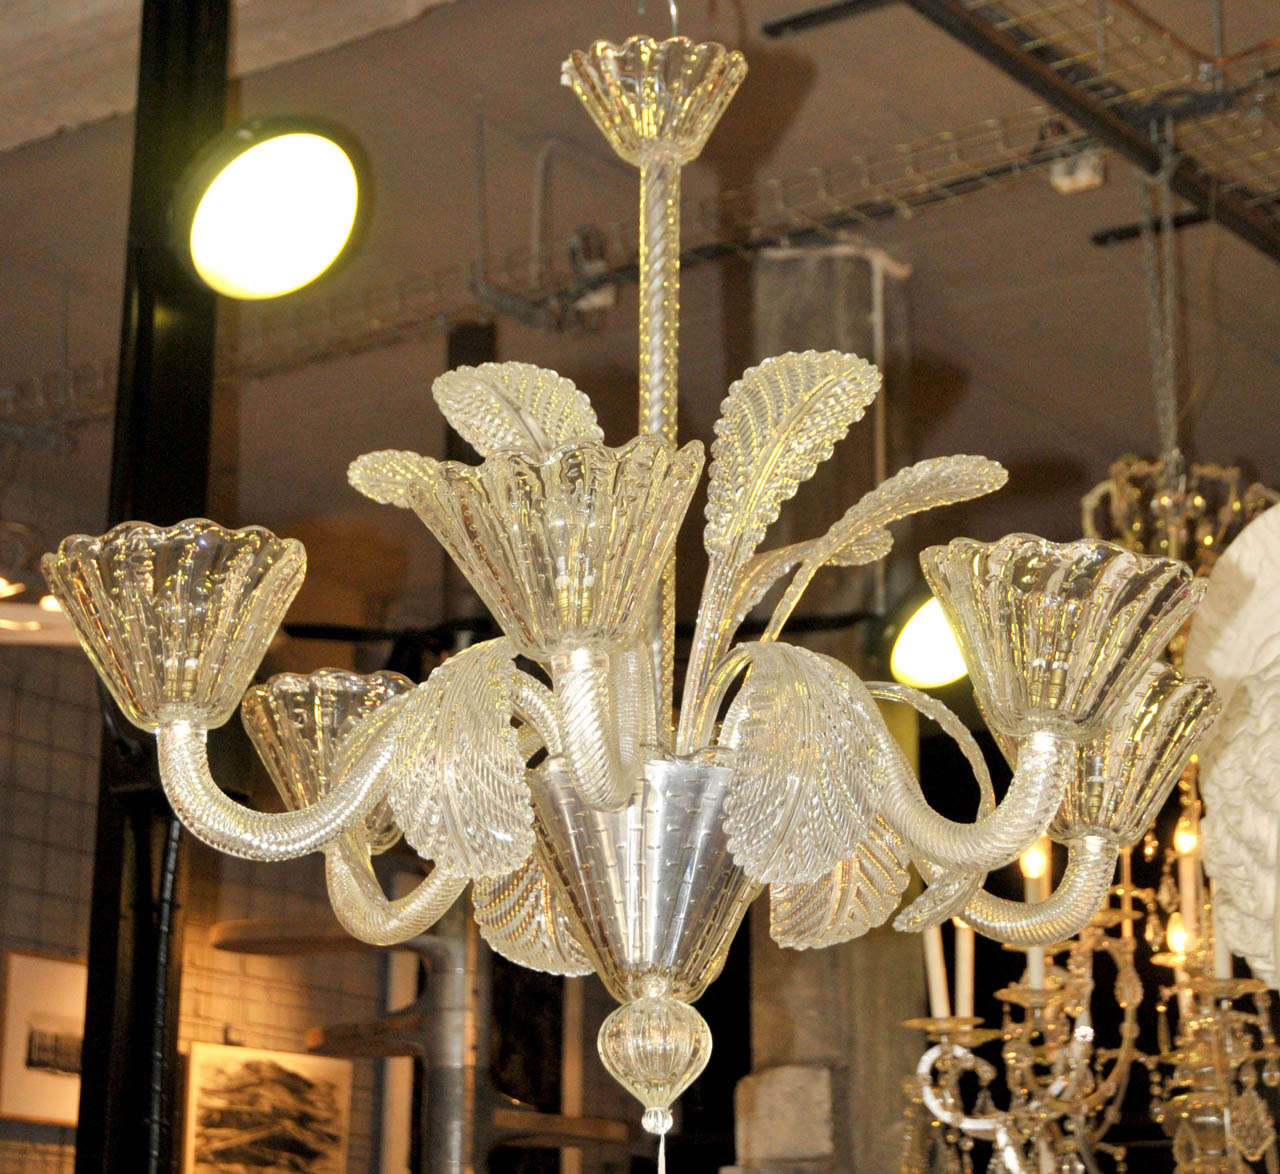 1950's Murano glass chandelier. Bubbled glass. Six lighted arms. Wired for European use. Good condition. Normal wear consistent with age and use.